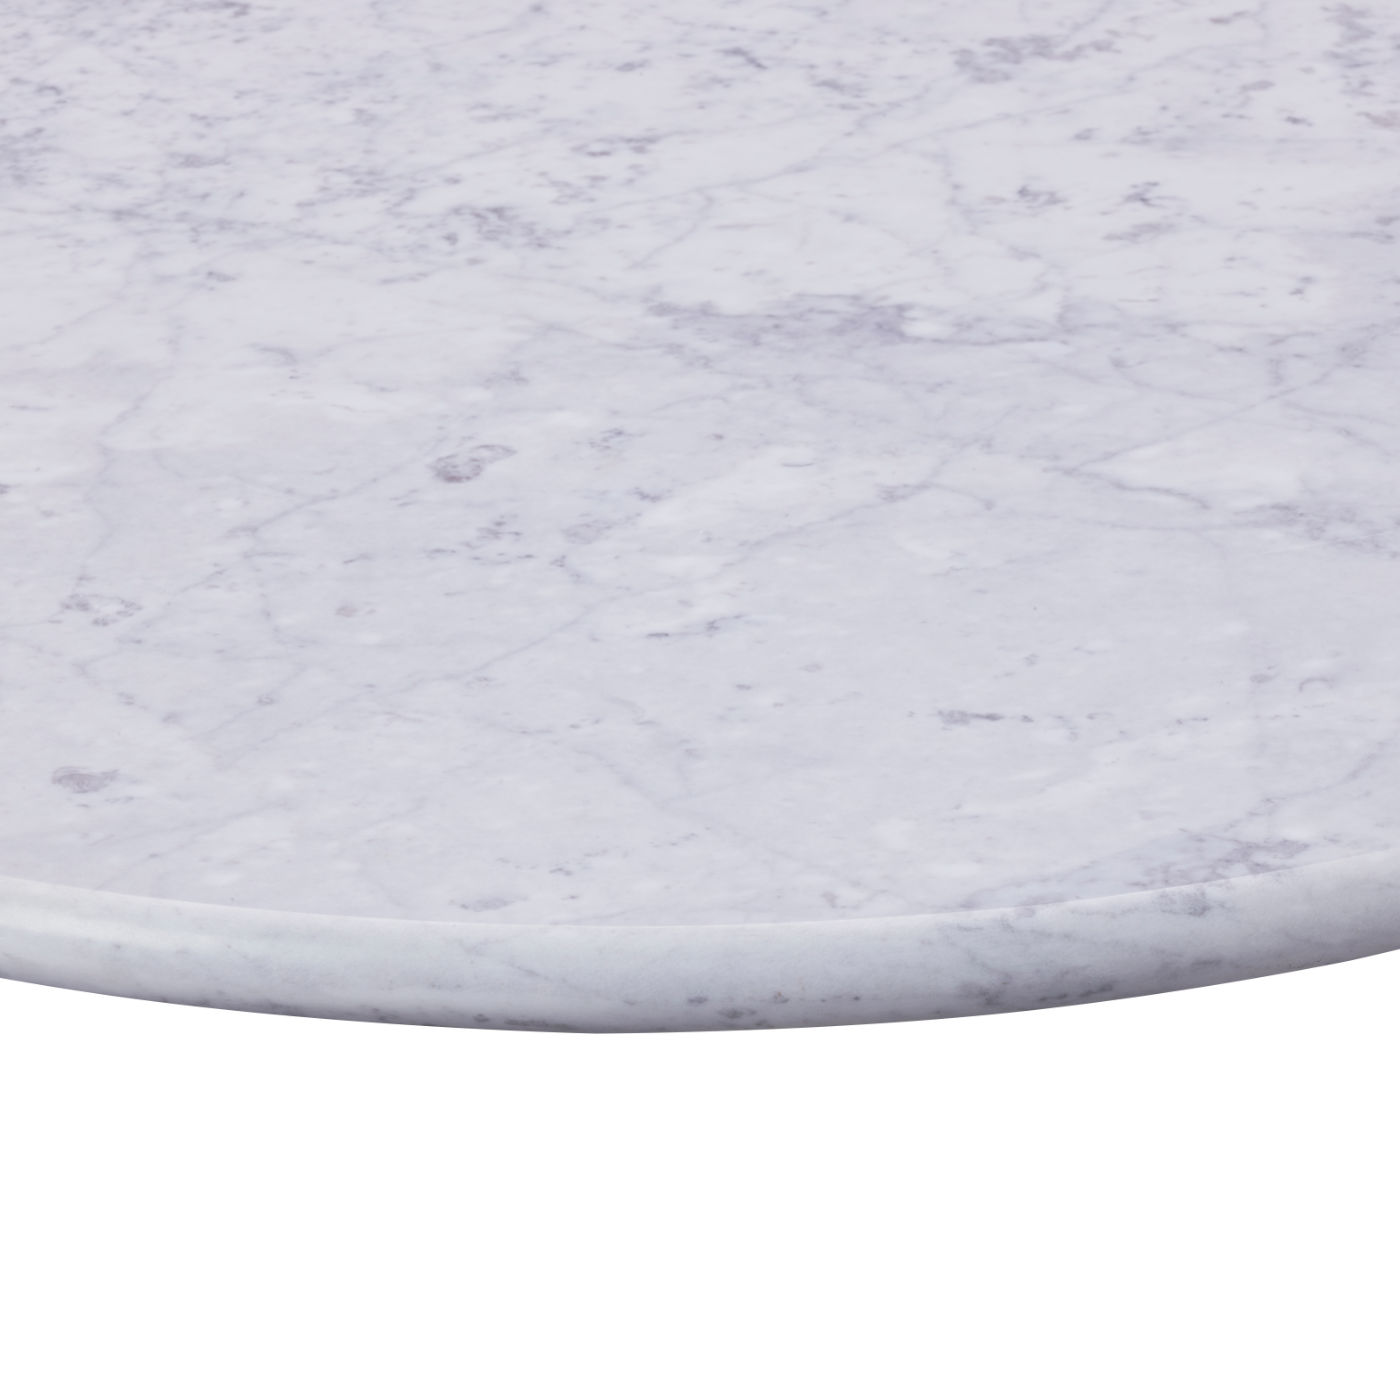 80cm Round Tabus Solid Carrara Marble Table Top – 20mm thick